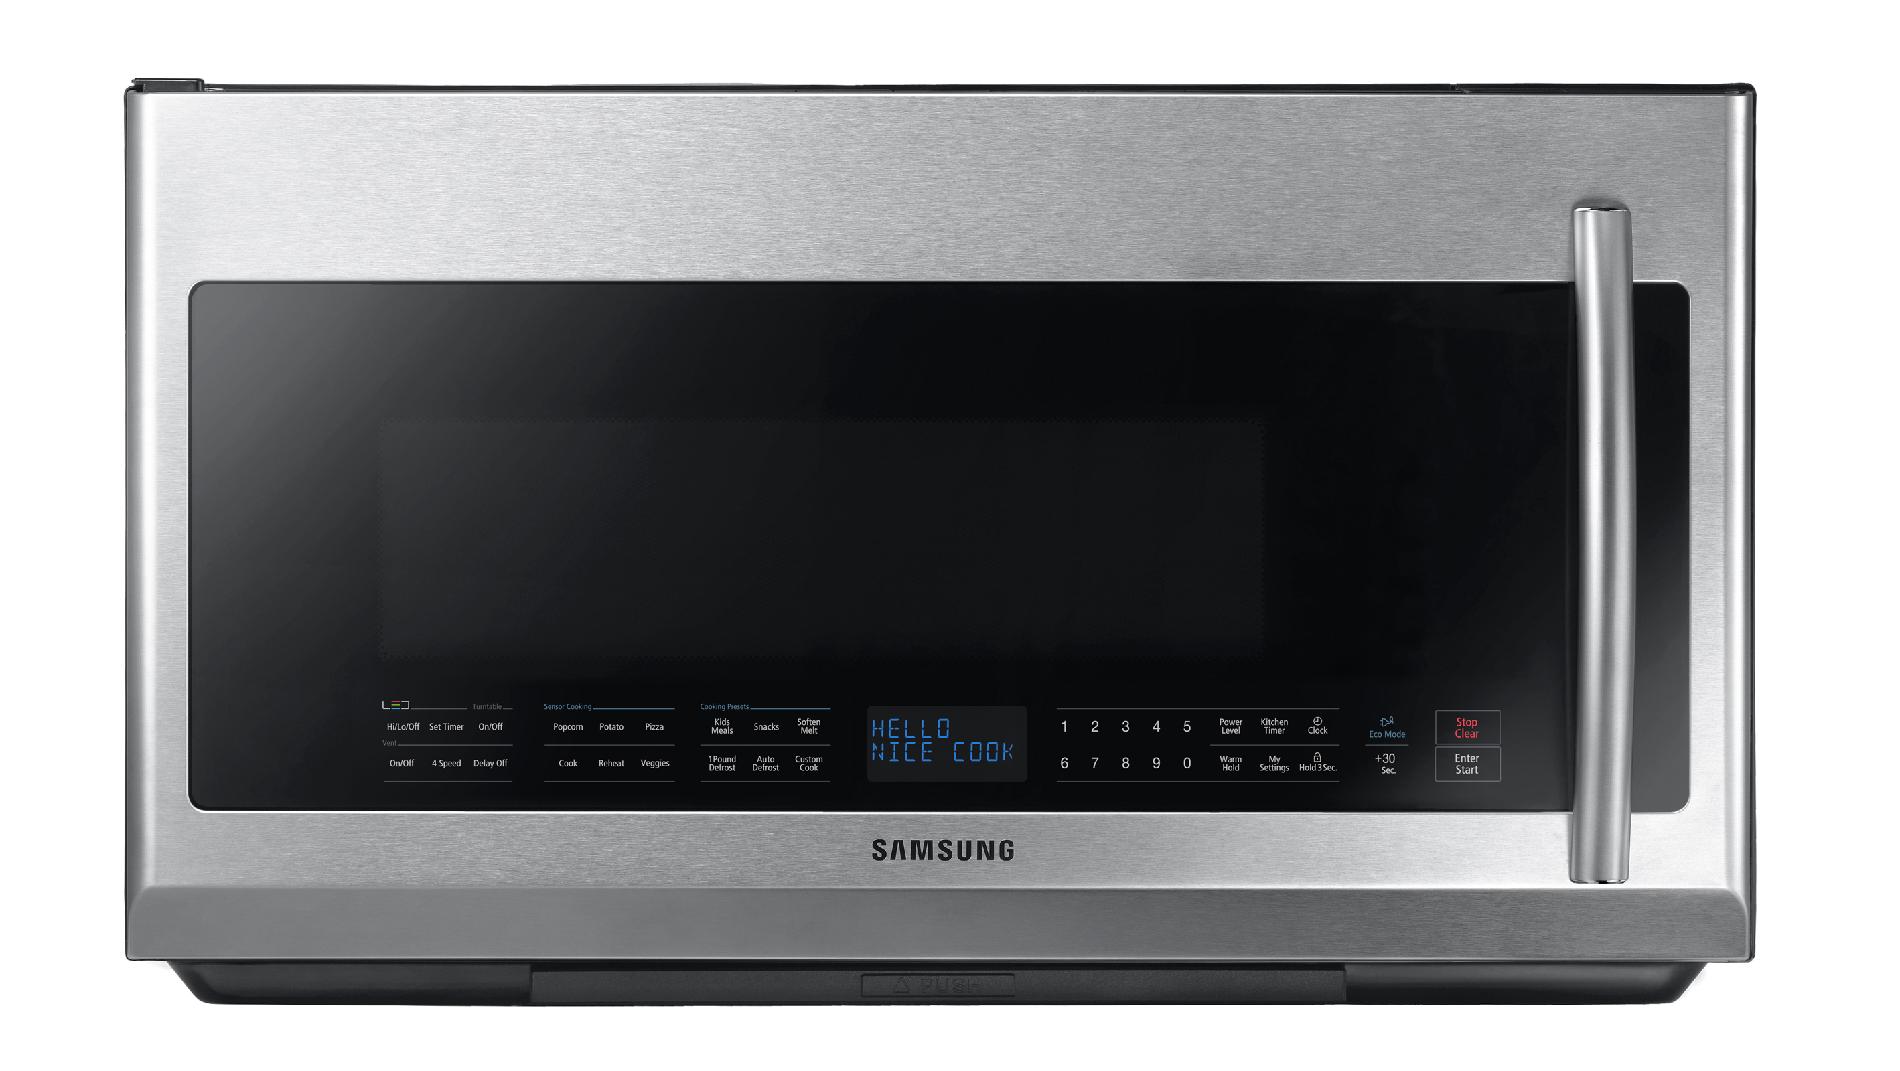 Samsung 2.1 cu. ft. Over-the-Range Microwave Oven - Stainless Steel